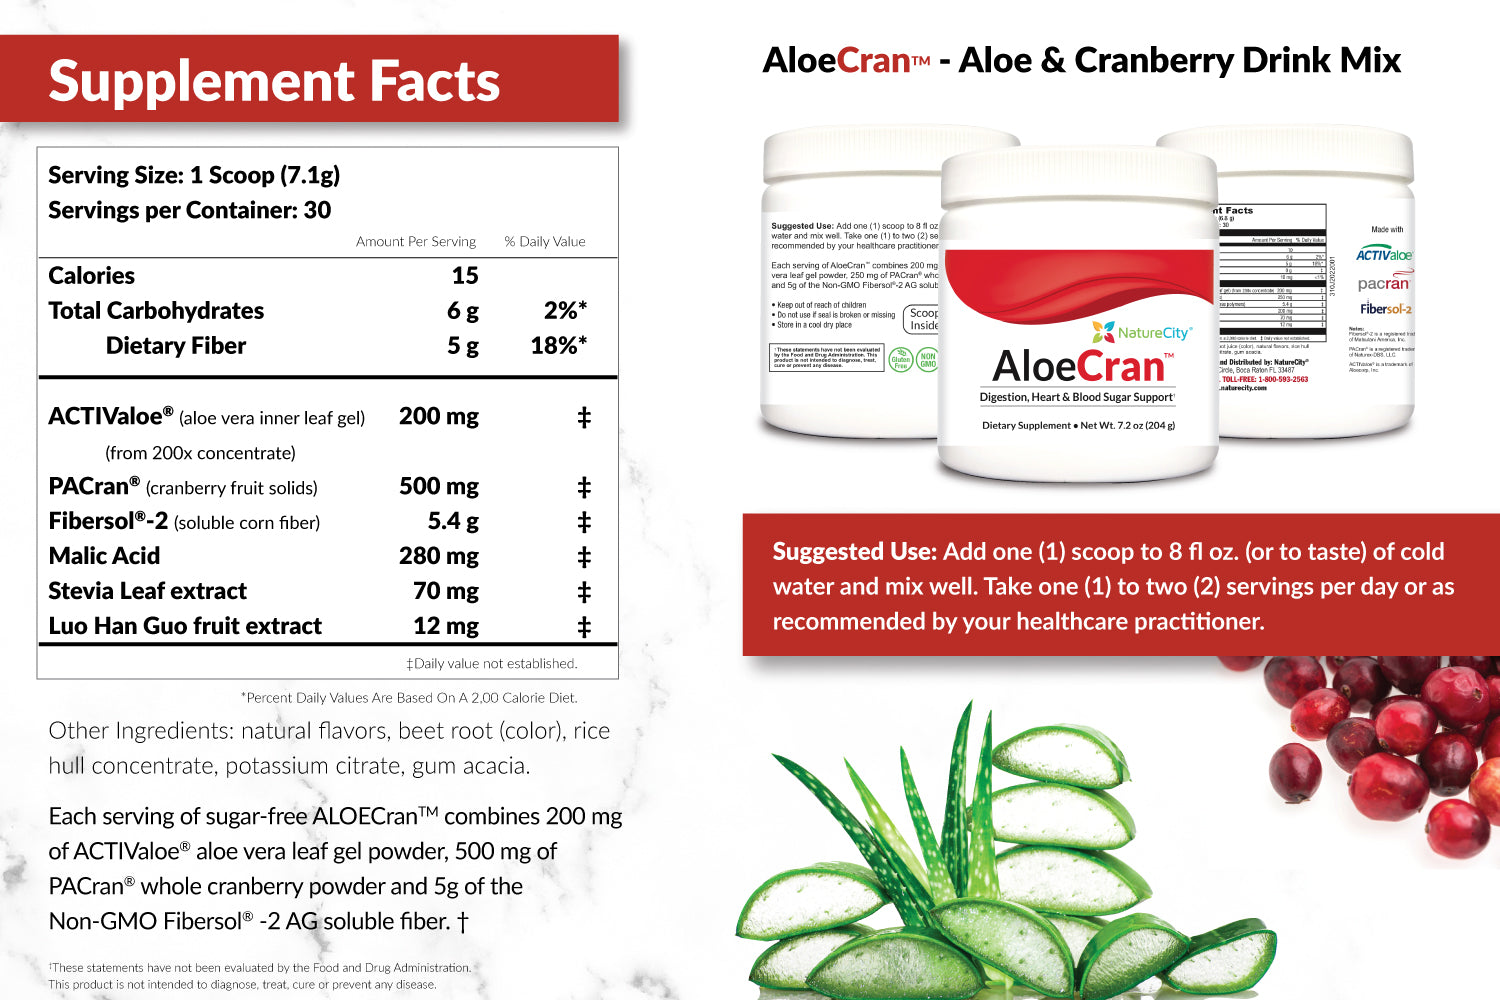 AloeCran Supplement Facts and Suggested Use